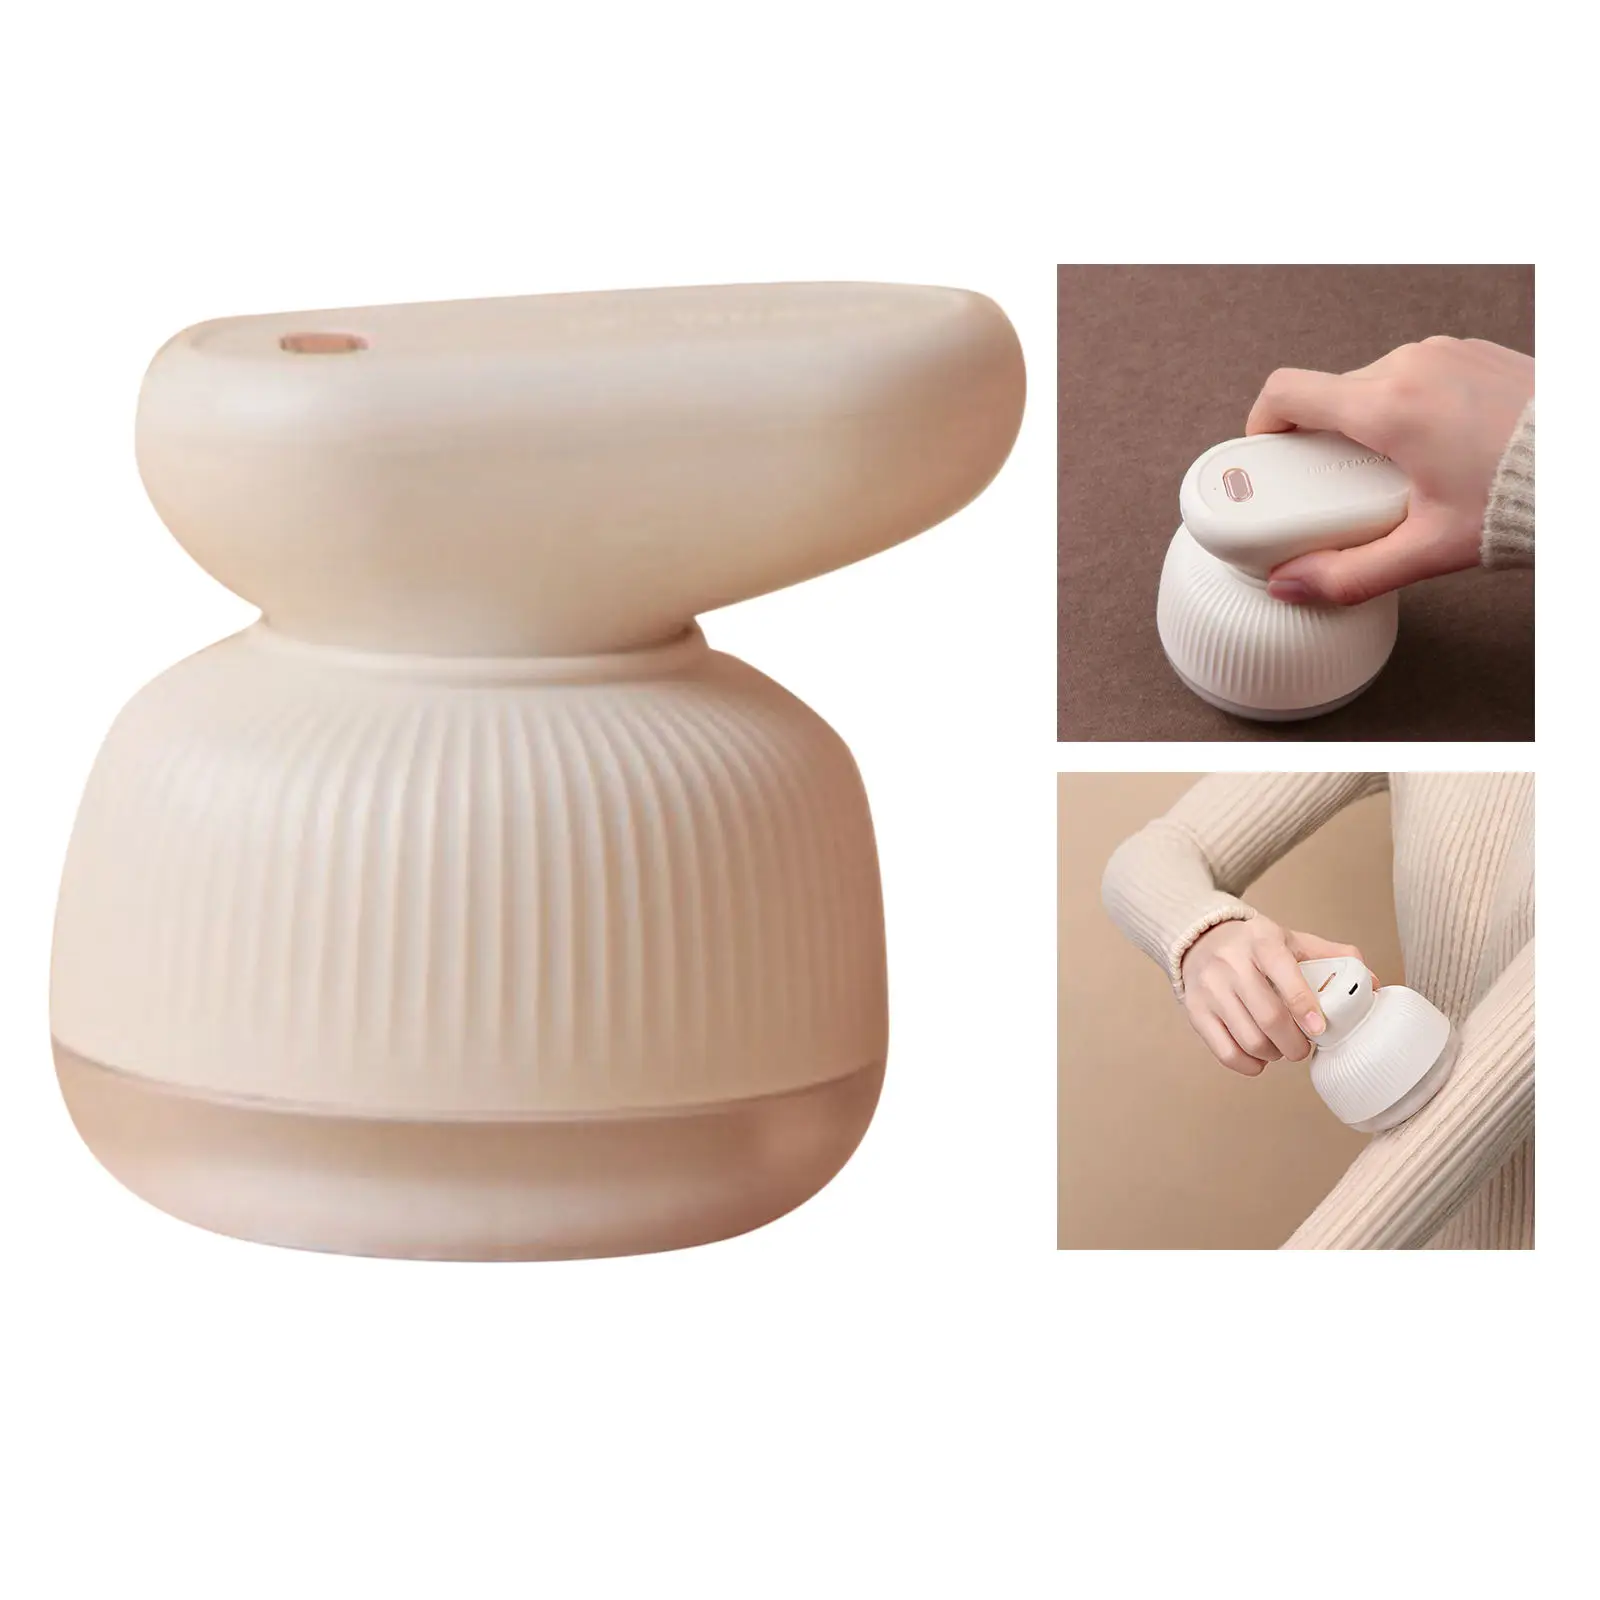 Electric Lint Remover Detachable Cleaning Trimmer Epilator for Sweater Laundry Tools